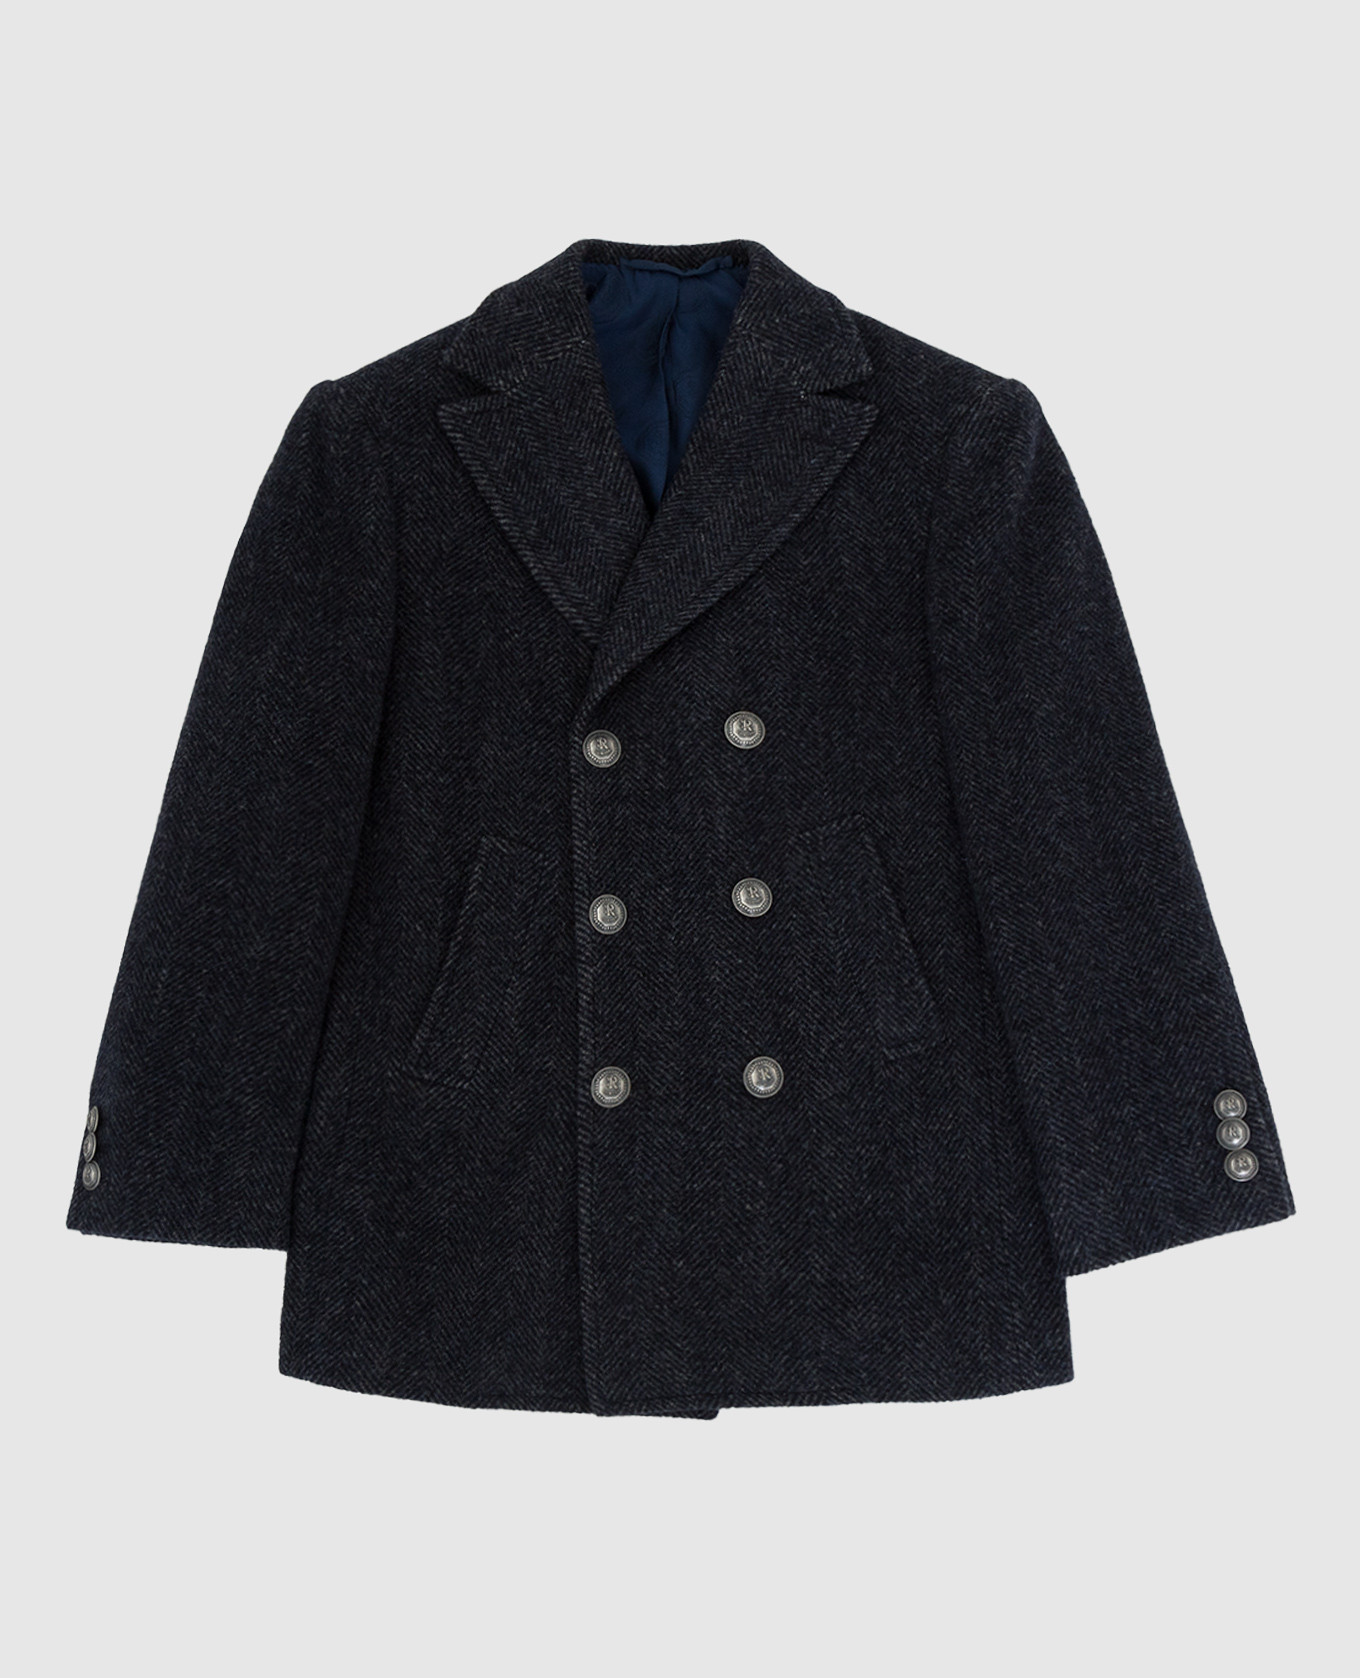 Children's wool and cashmere coat